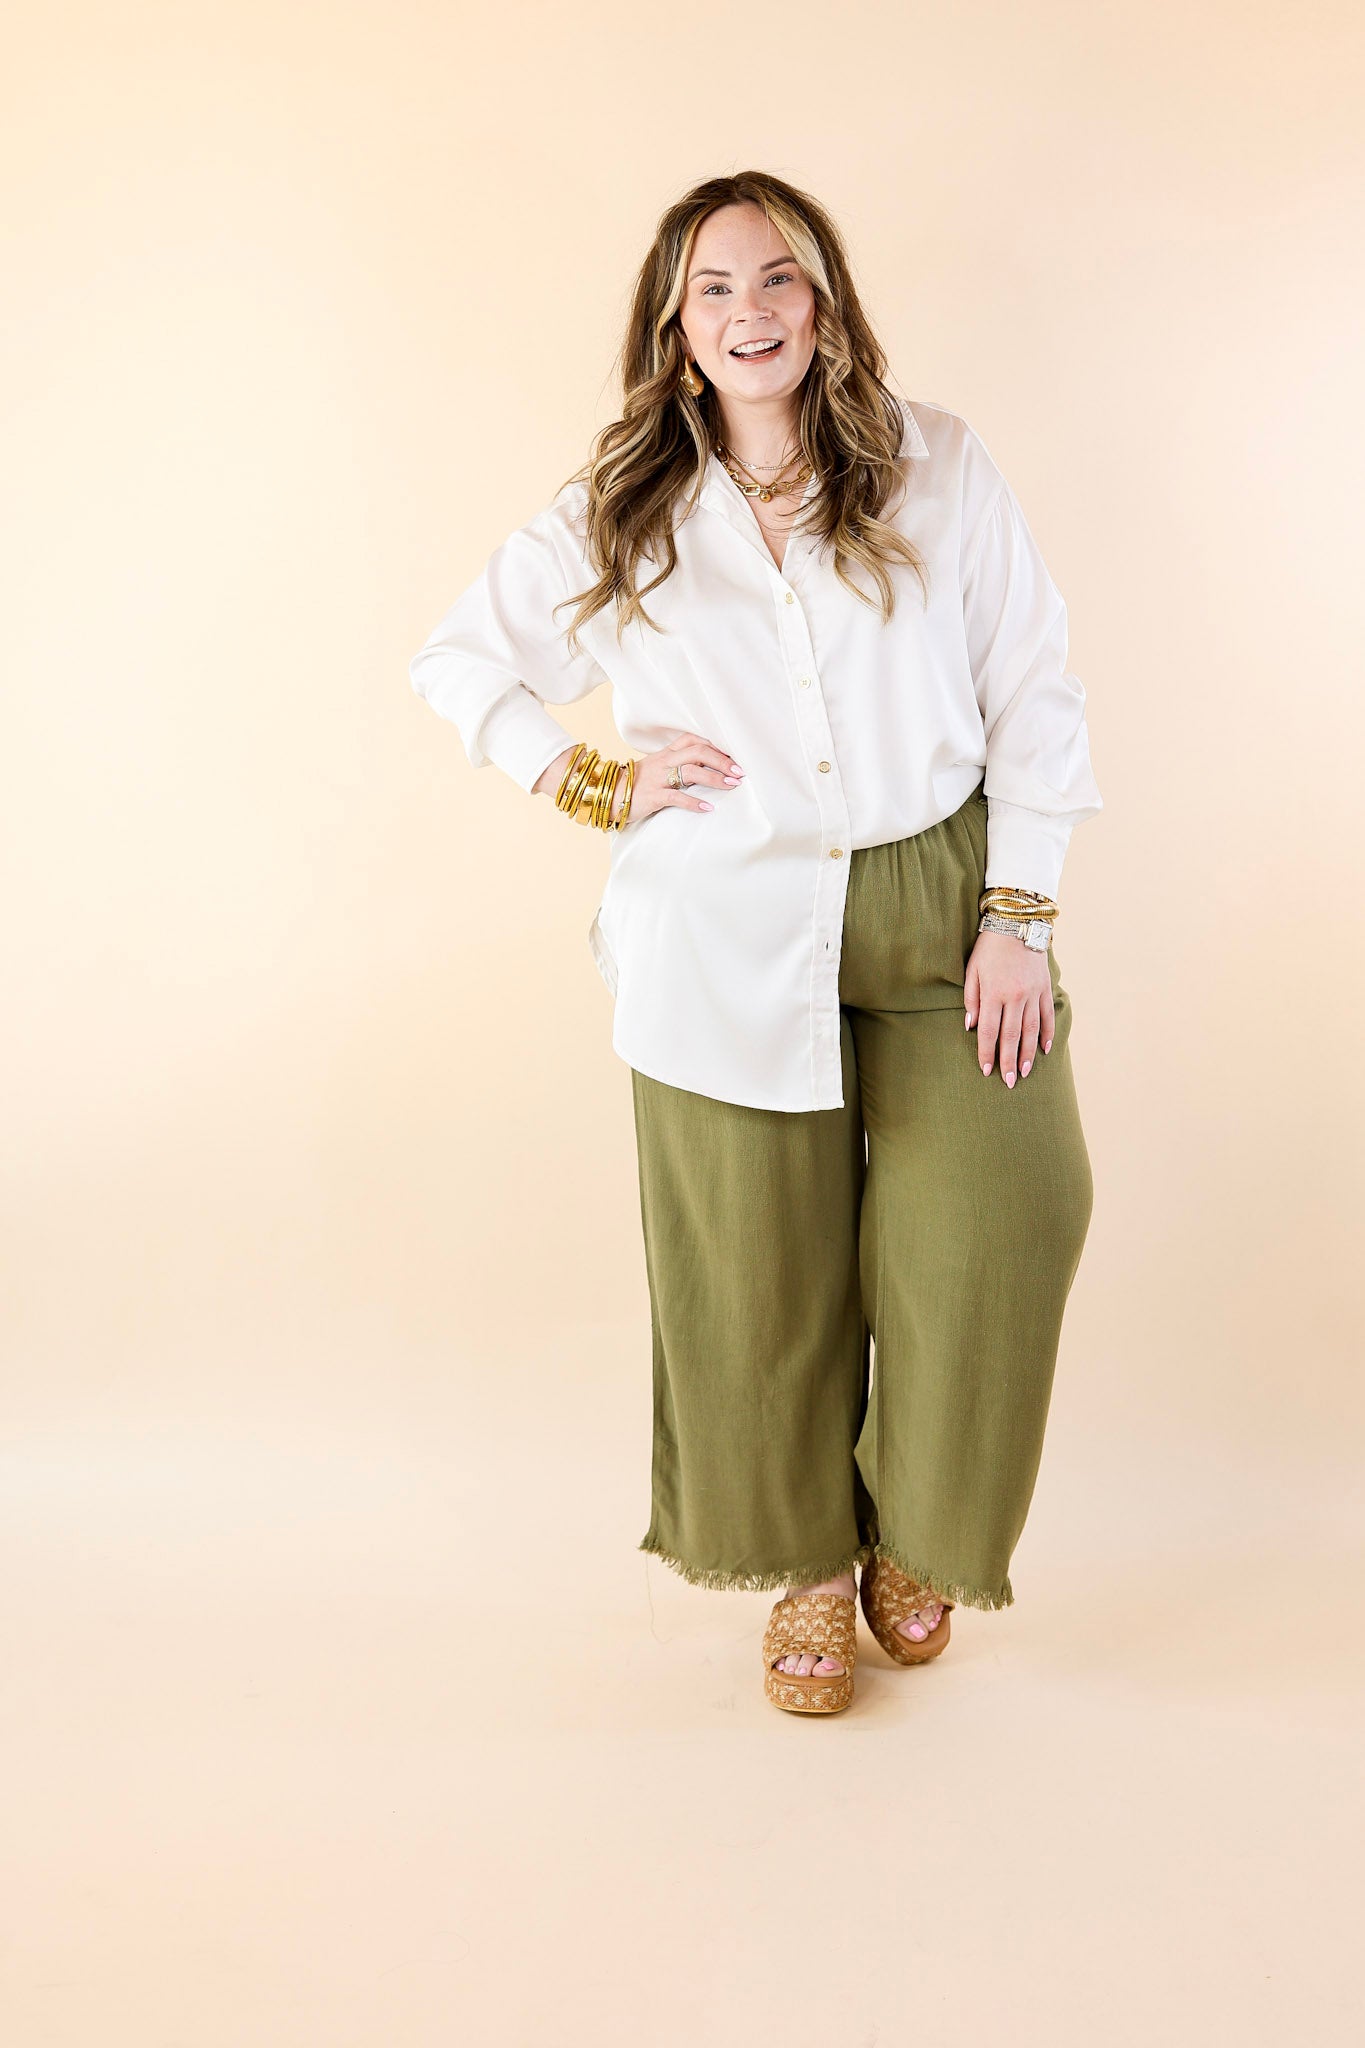 Tell Me Something Good Long Sleeve Button Up Top in Off White - Giddy Up Glamour Boutique